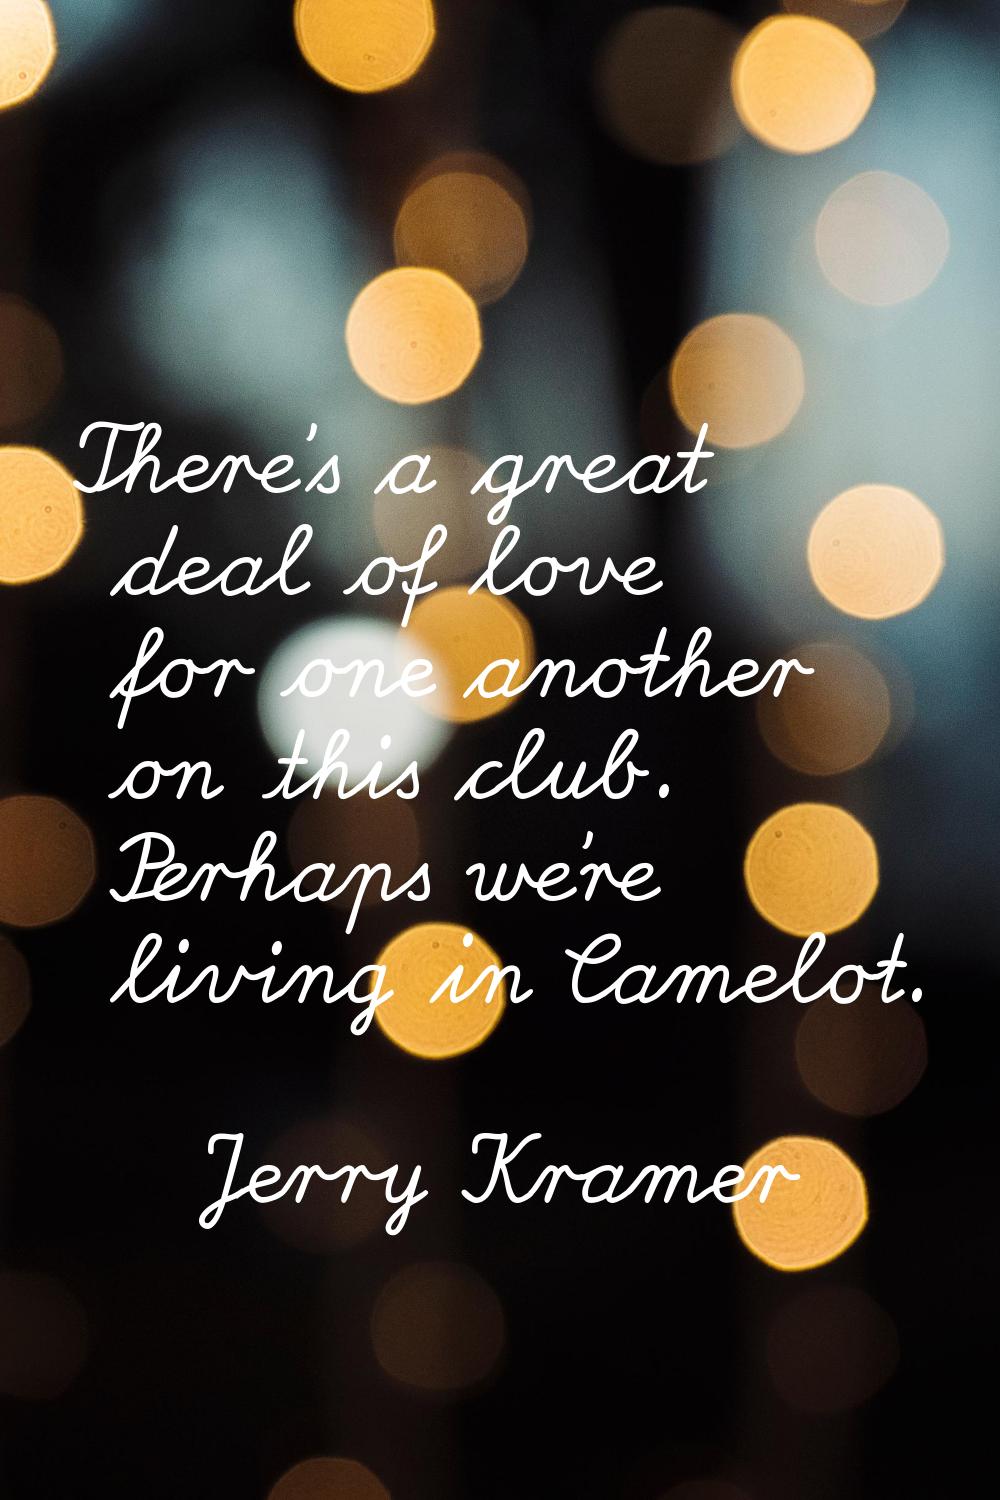 There's a great deal of love for one another on this club. Perhaps we're living in Camelot.